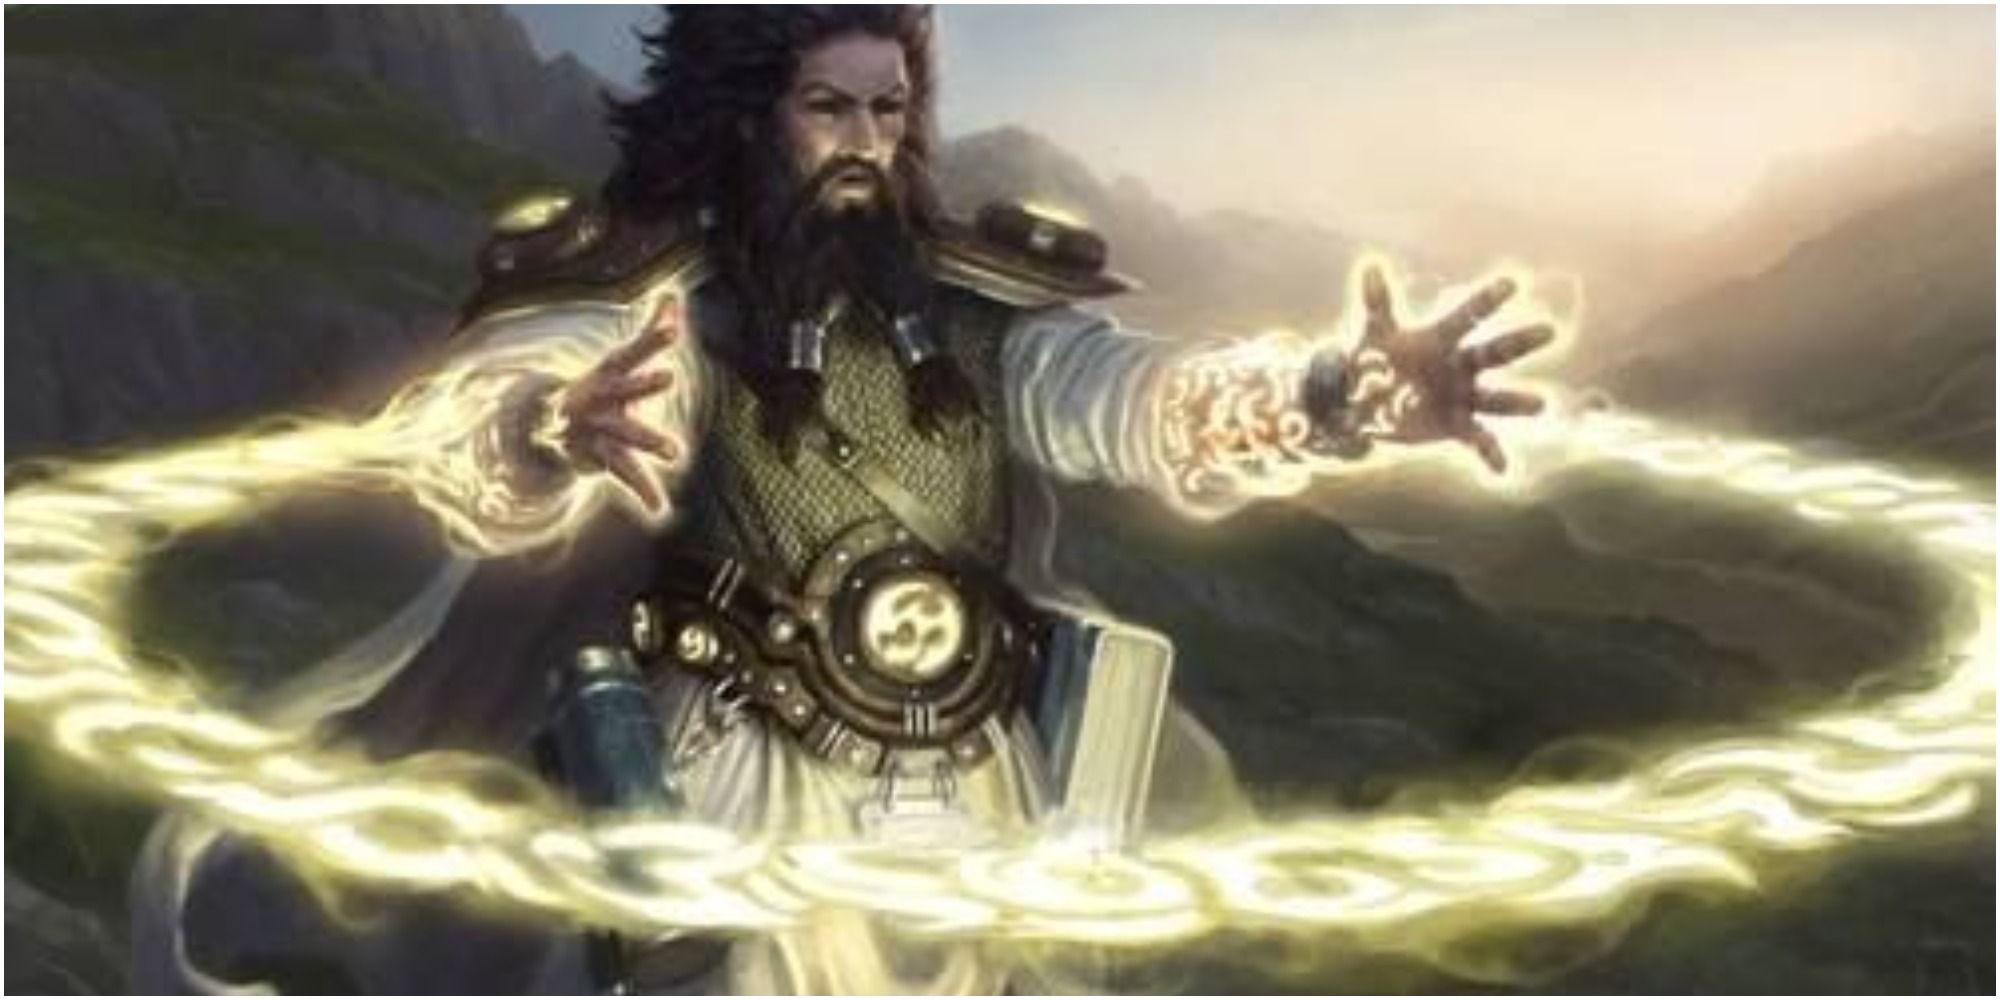 Dungeons And Dragons Artwork Of A Cleric Casting A Divine Spell